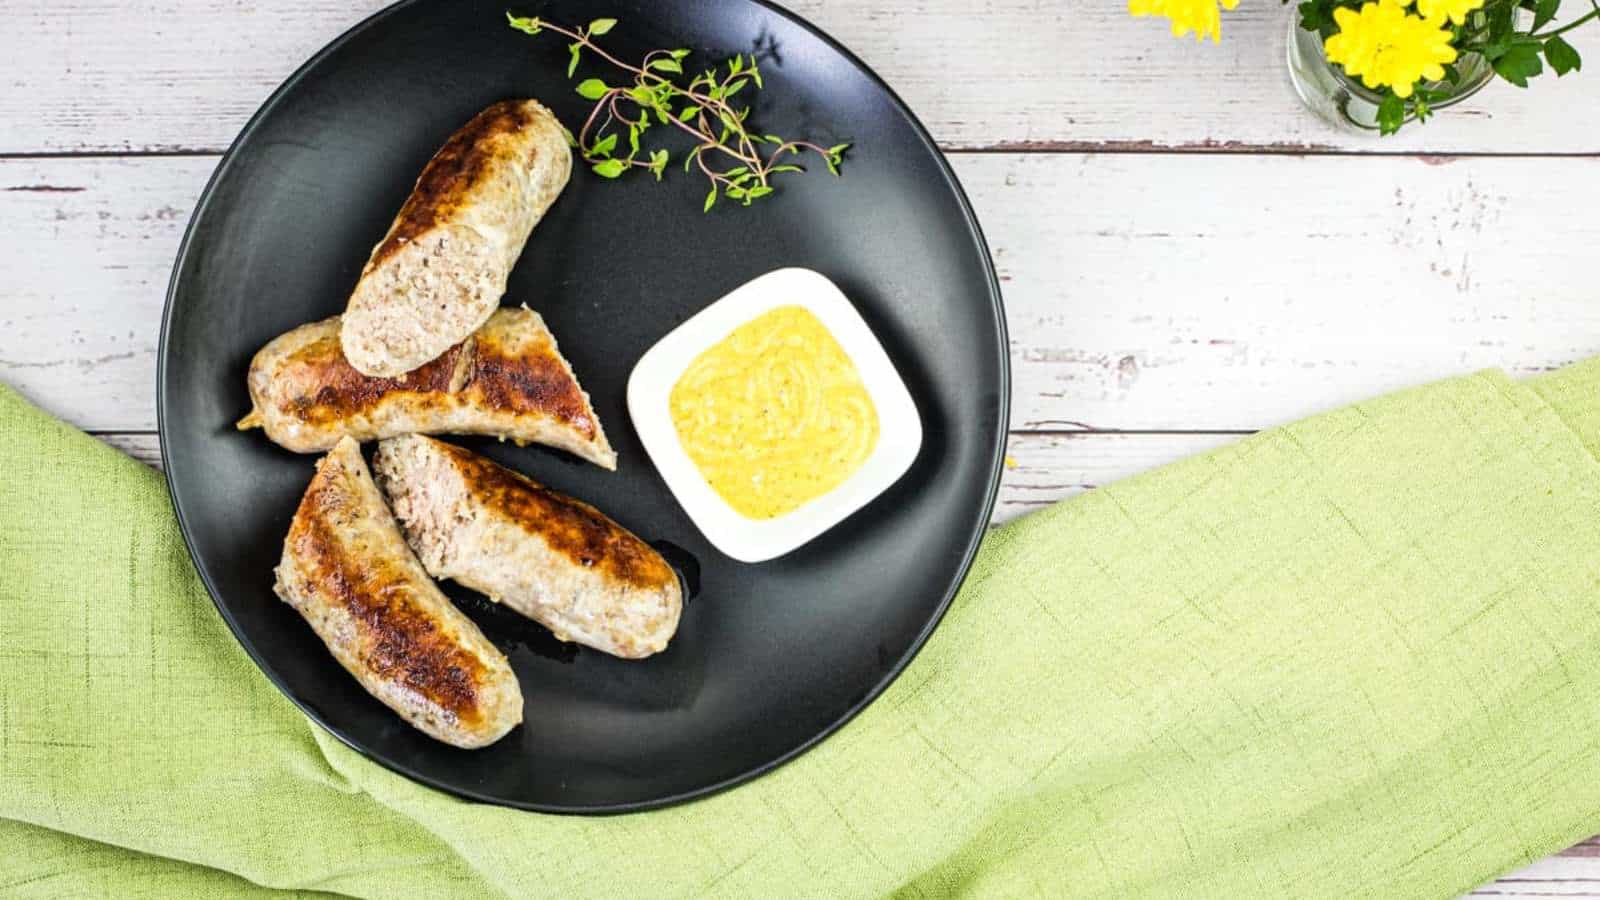 Sous Vide Sausage with mustard sauce on a black plate.